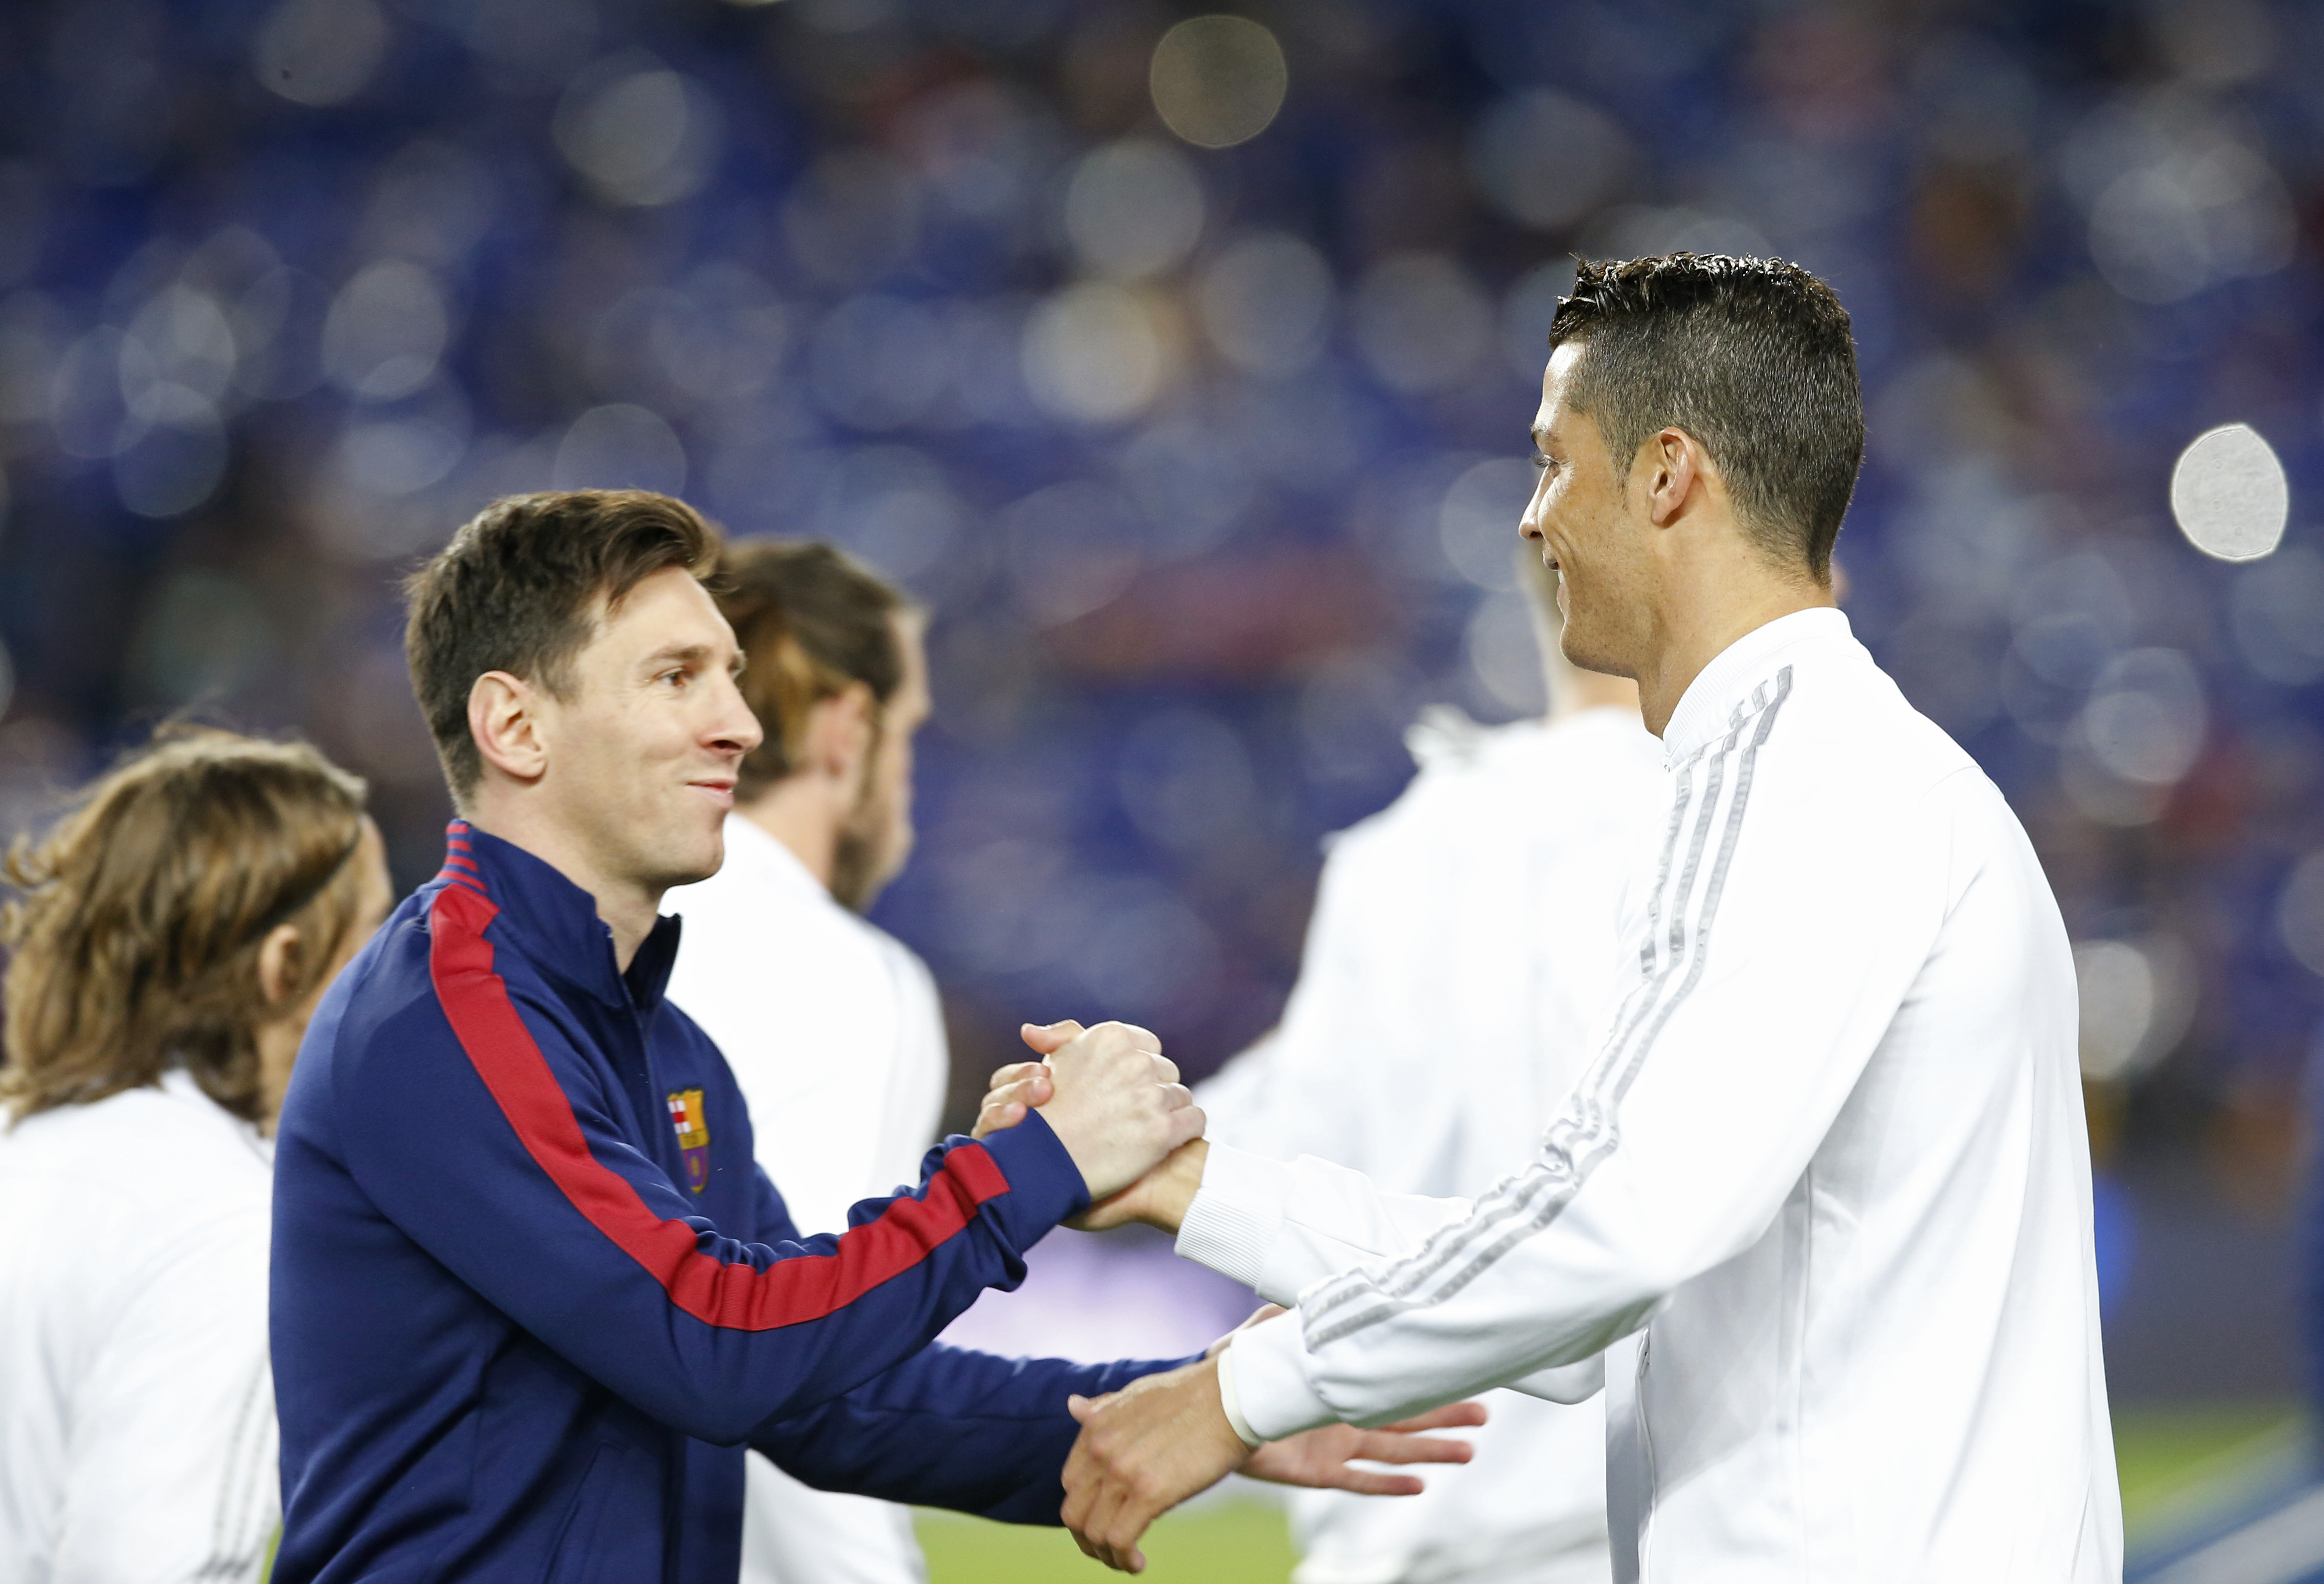 Football Soccer - FC Barcelona v Real Madrid - La Liga - Camp Nou, Barcelona - 2/4/16
Barcelona's Lionel Messi shakes hands with Real Madrid's Cristiano Ronaldo before the game
Reuters / Albert Gea
Livepic
EDITORIAL USE ONLY. - RTSDADT